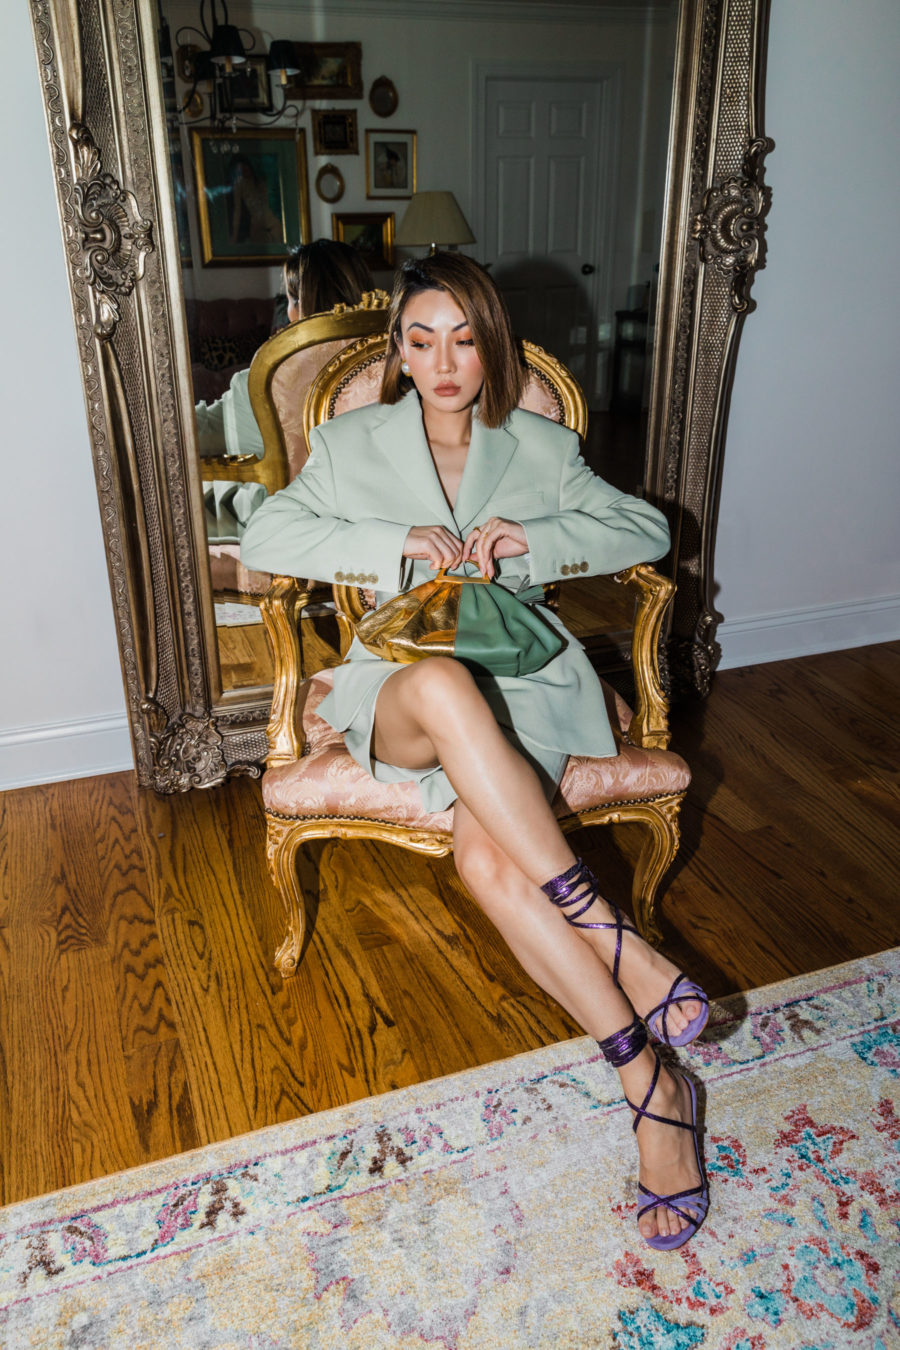 fashion blogger jessica wang wears acne blazer and long shorts with paris texas purple heels from farfetch private client // Notjessfashion.com